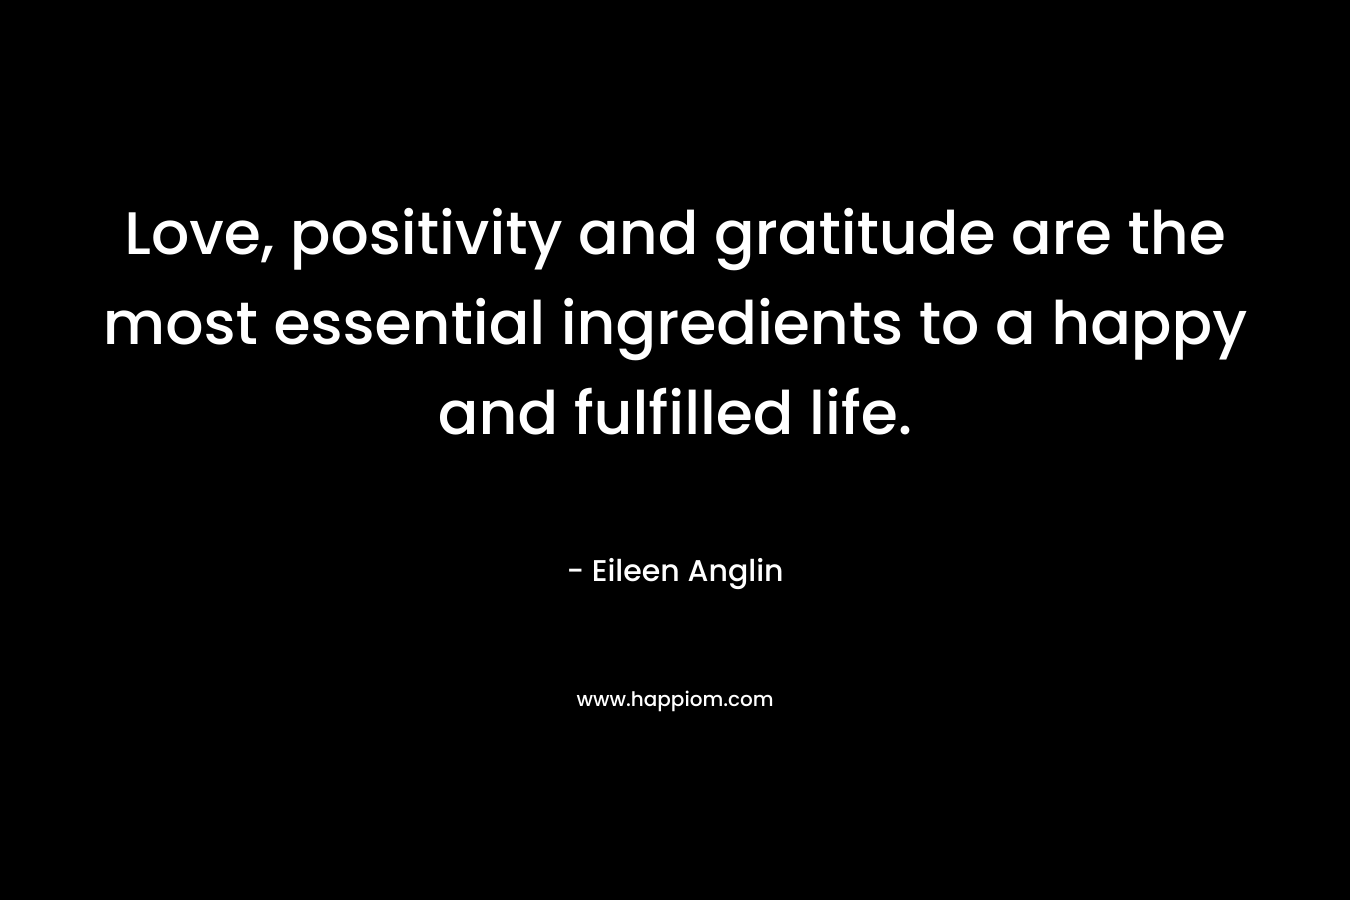 Love, positivity and gratitude are the most essential ingredients to a happy and fulfilled life. – Eileen Anglin